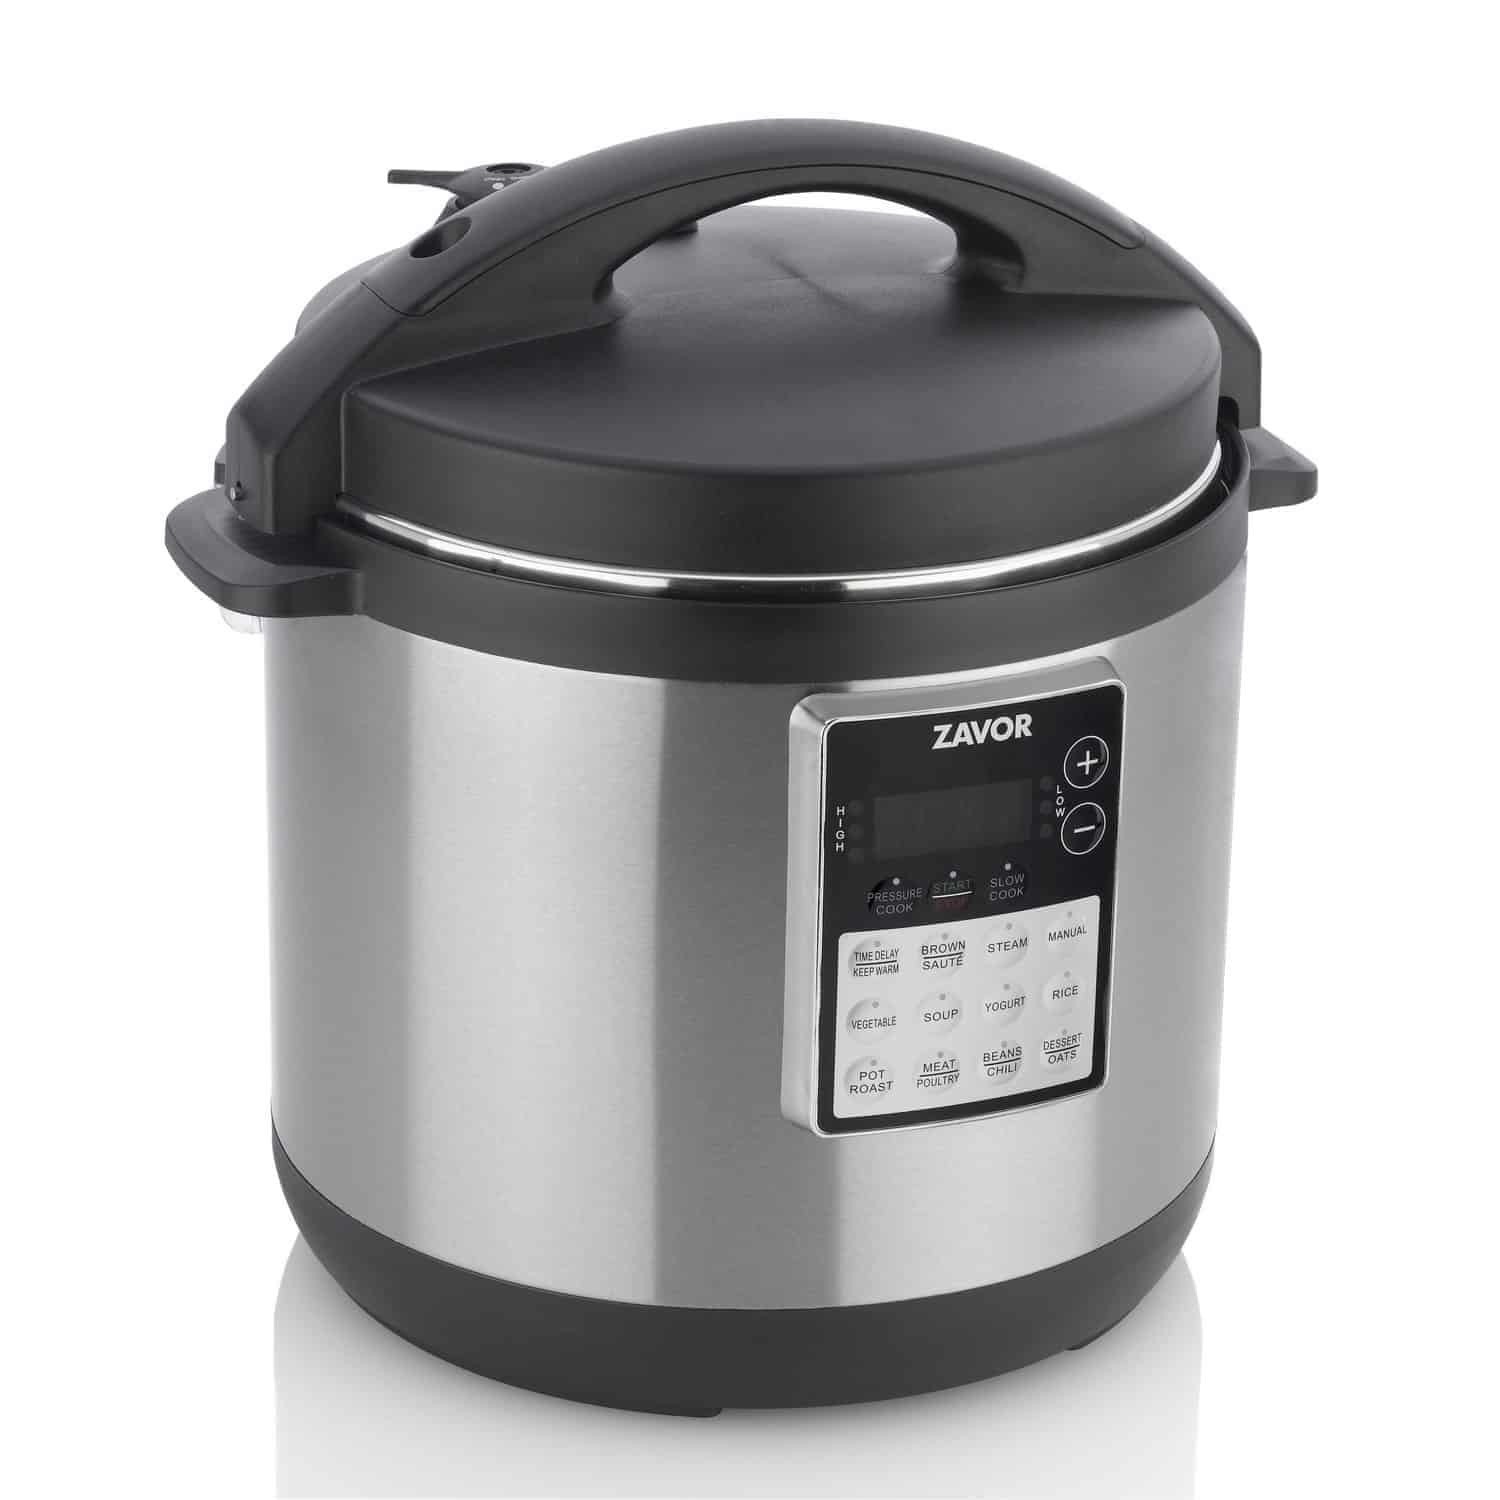 Buy LUX LCD Multi-Cooker